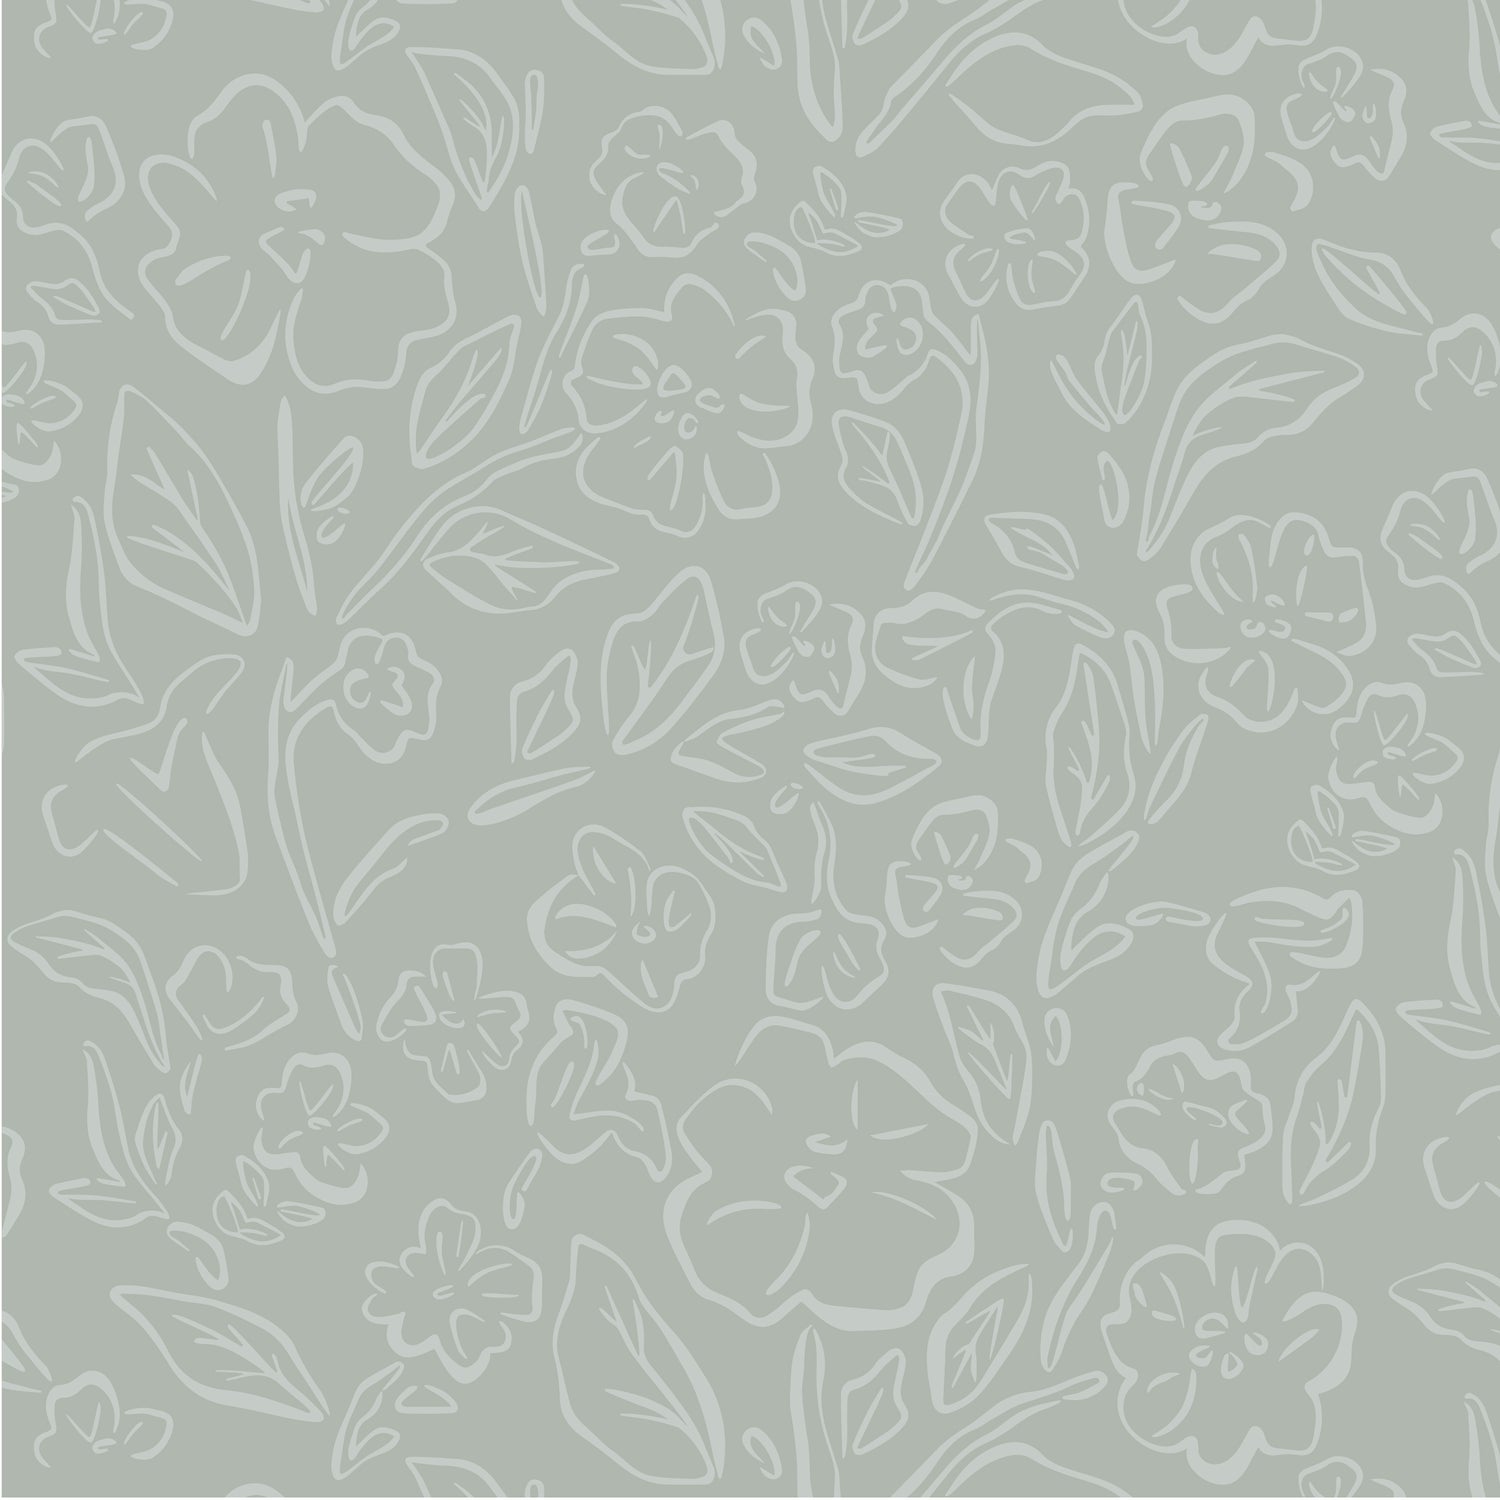 This Beverly Wallpaper in blue offers a stylish and feminine touch with its delicate floral design shown zoomed in.